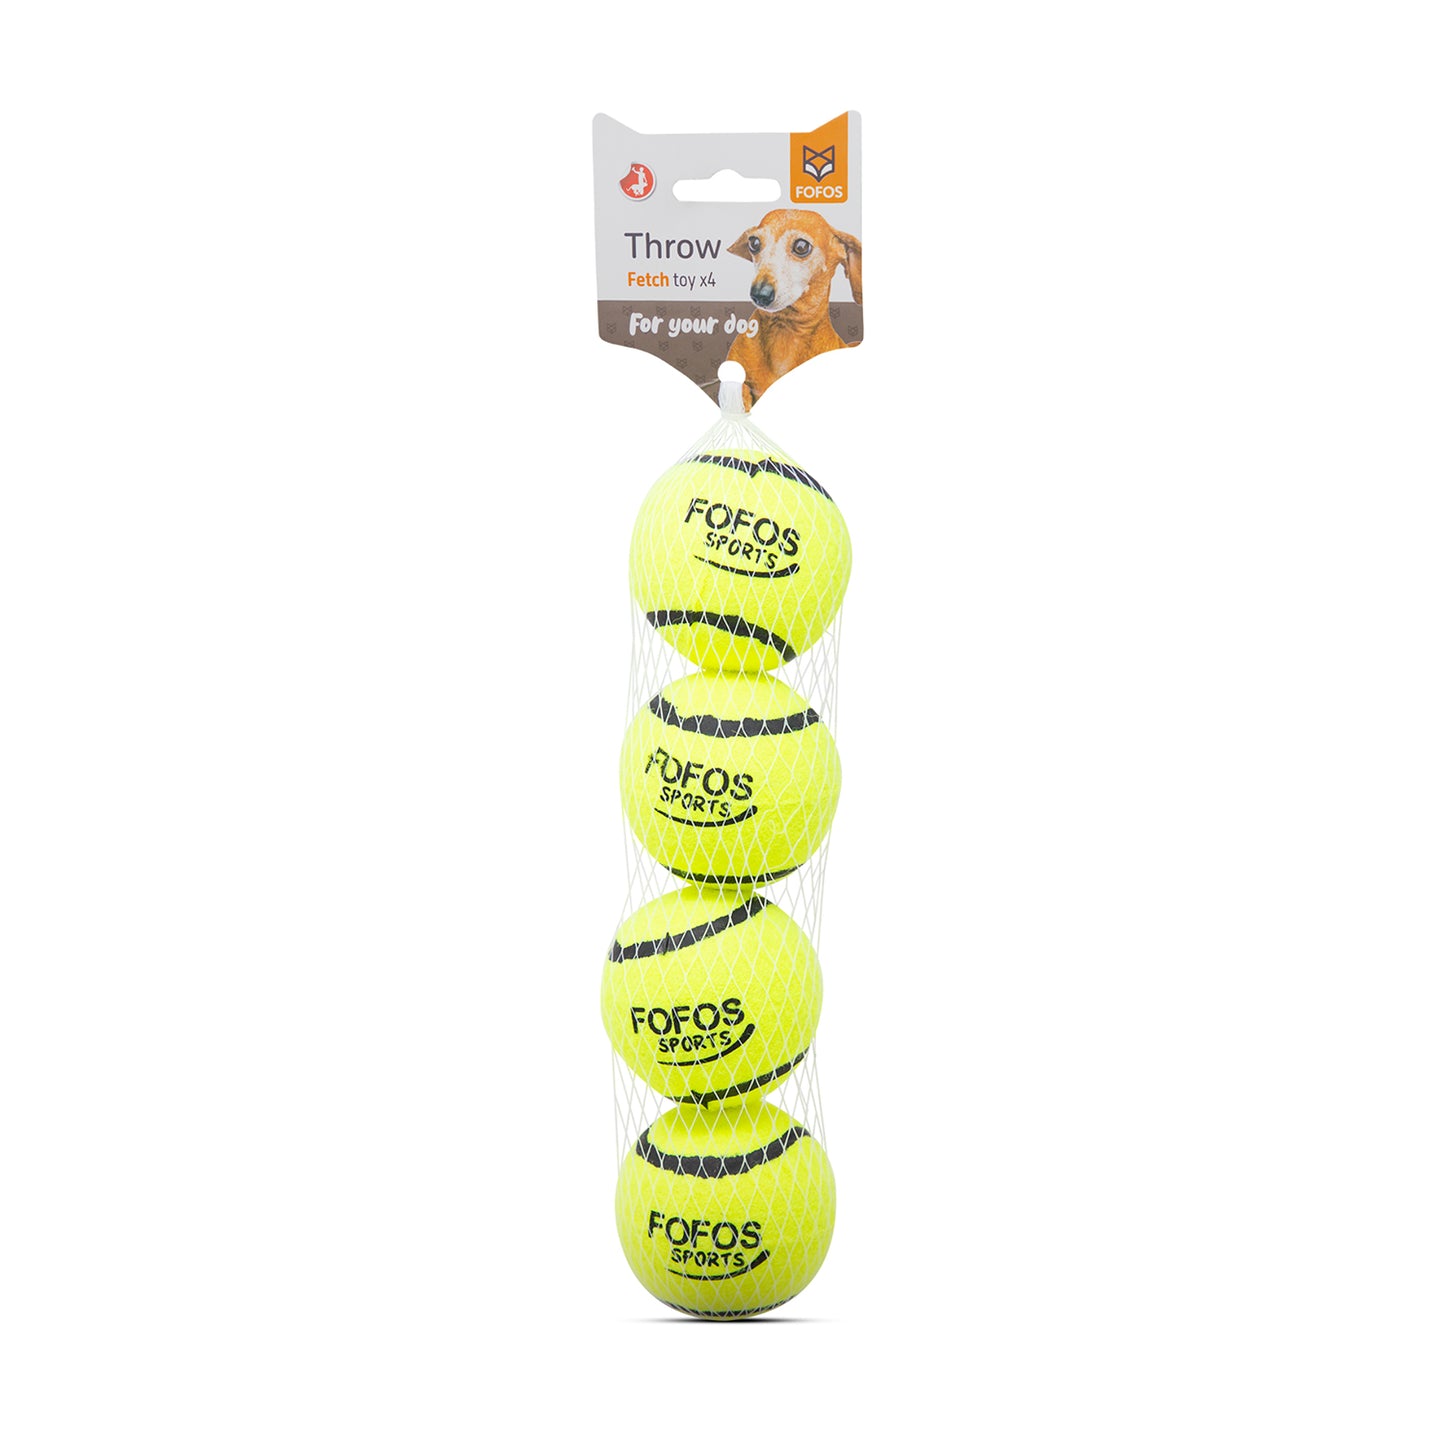 Fofos - Sports Fetch Ball Durable Toy For Dogs